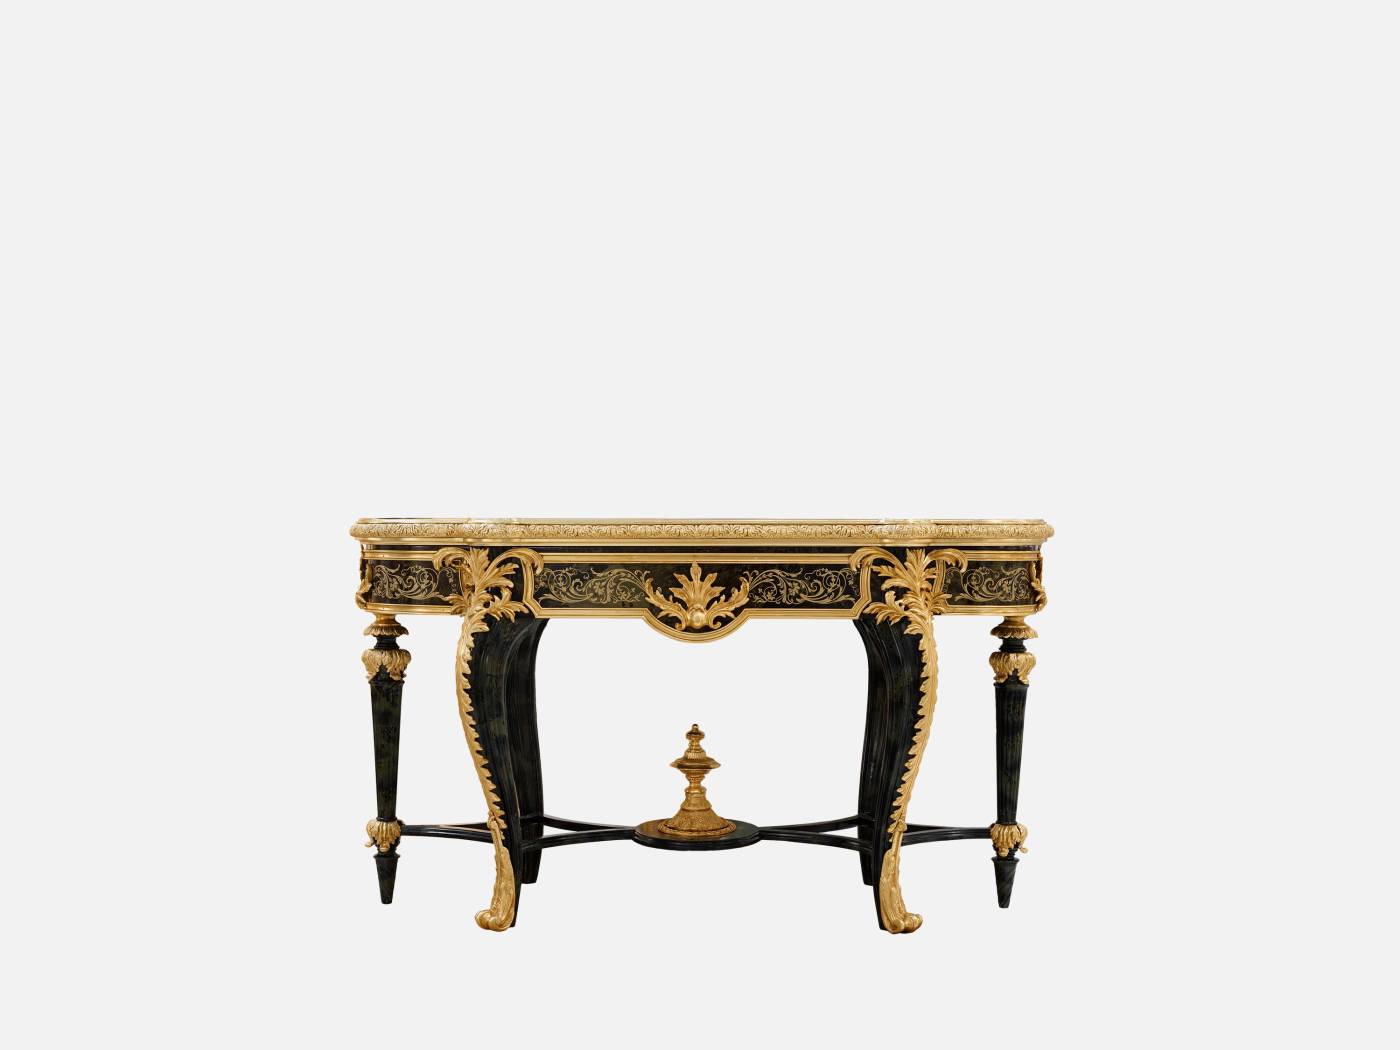 ART. 2185 - C.G. Capelletti quality furniture and timeless elegance with luxury made in italy contemporary Console.